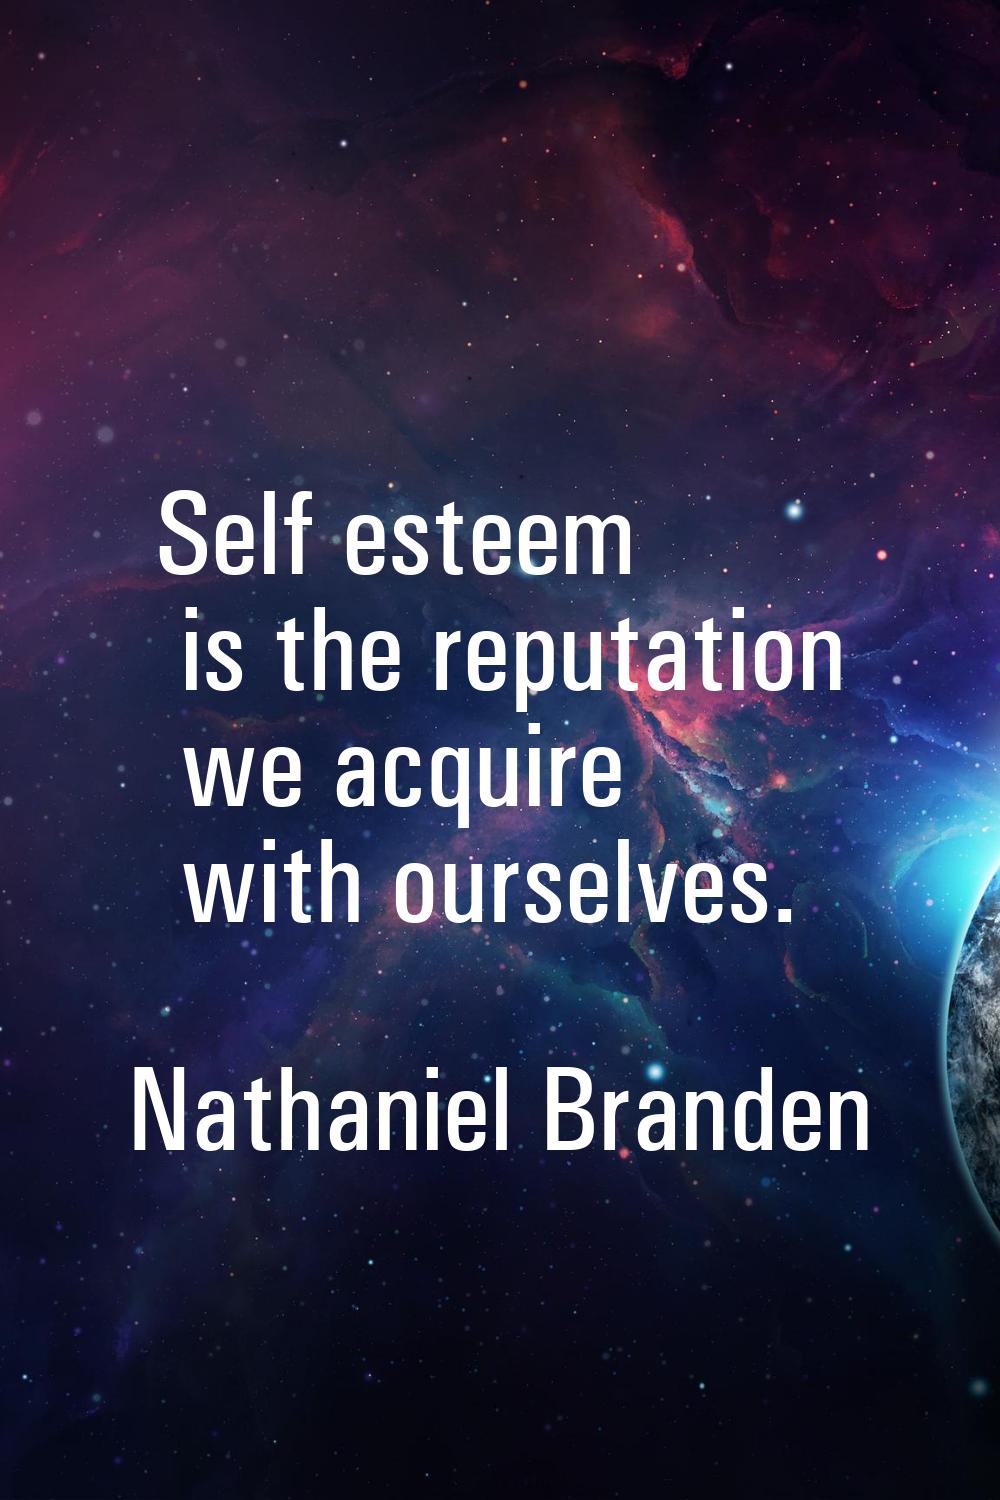 Self esteem is the reputation we acquire with ourselves.